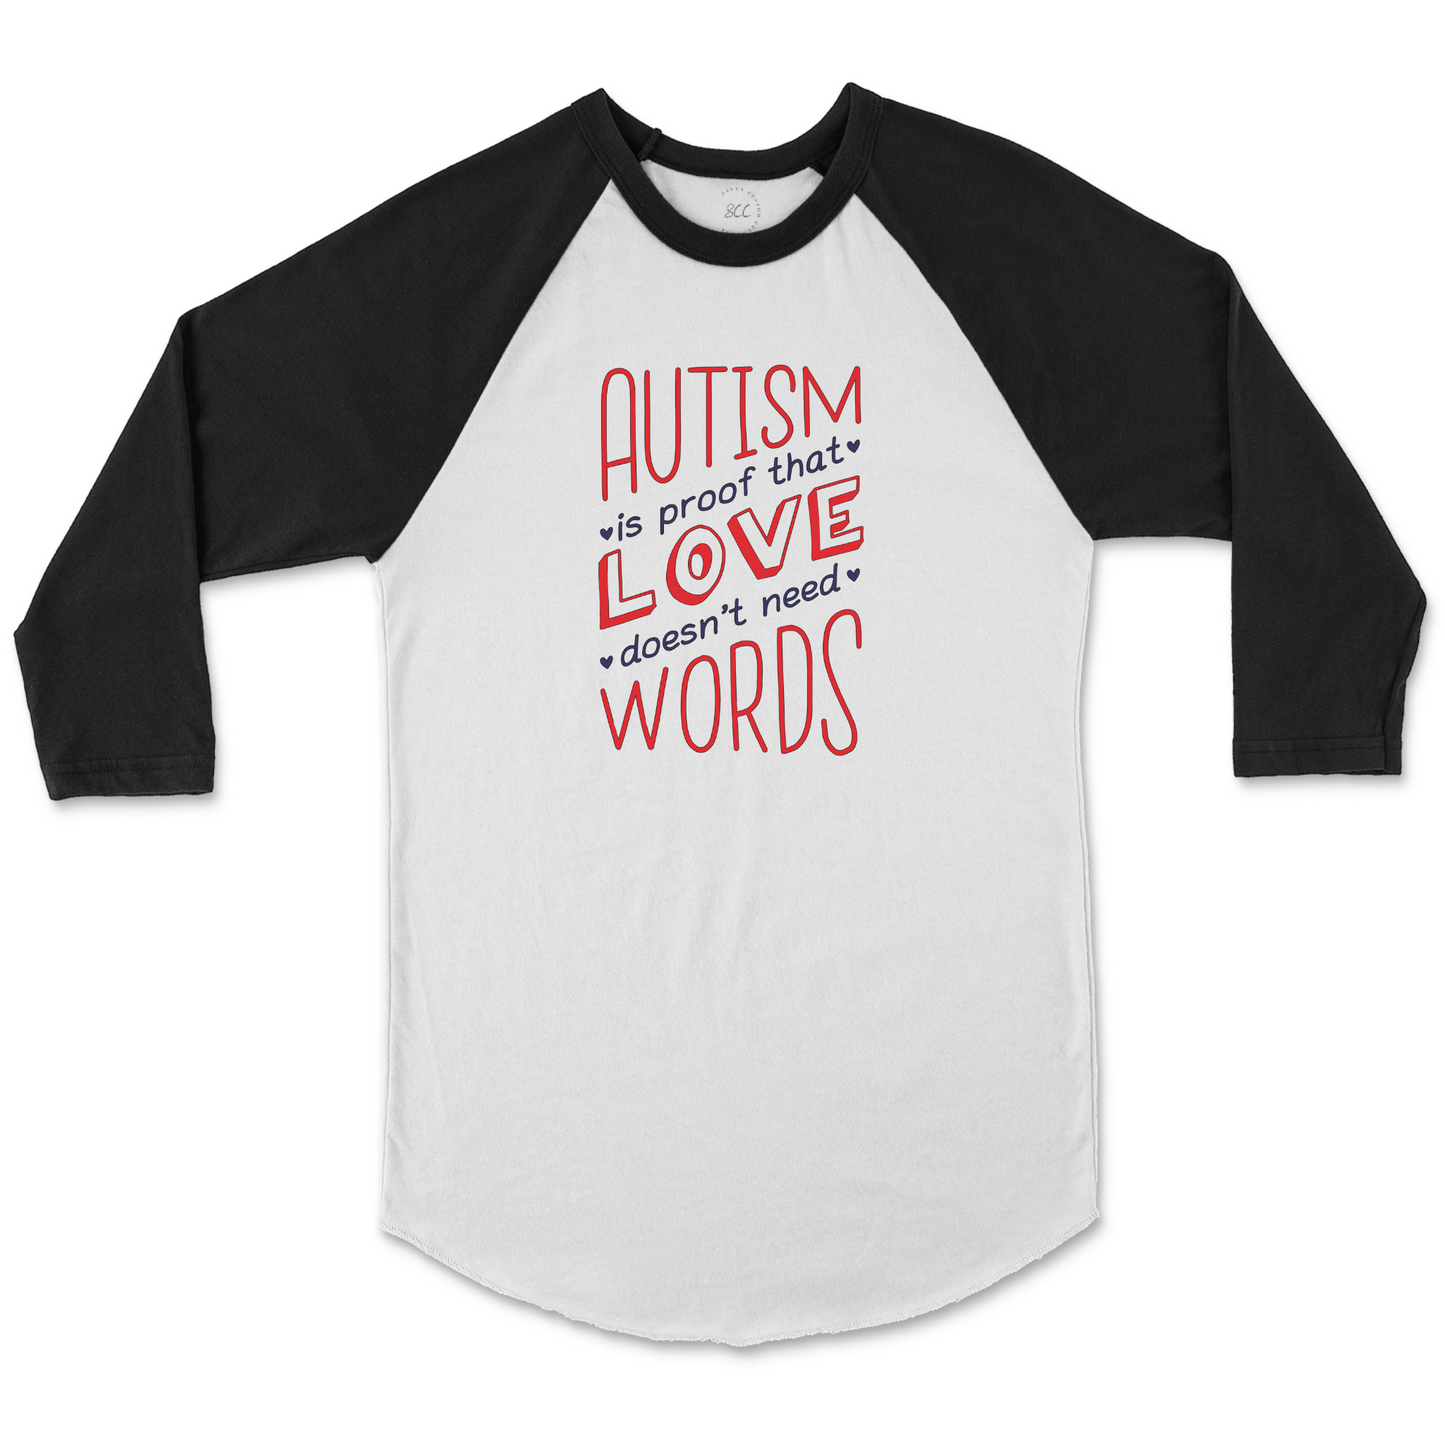 AUTISM IS PROOF THAT LOVE DOESN’T NEED WORDS - Unisex Raglan Baseball T-Shirt